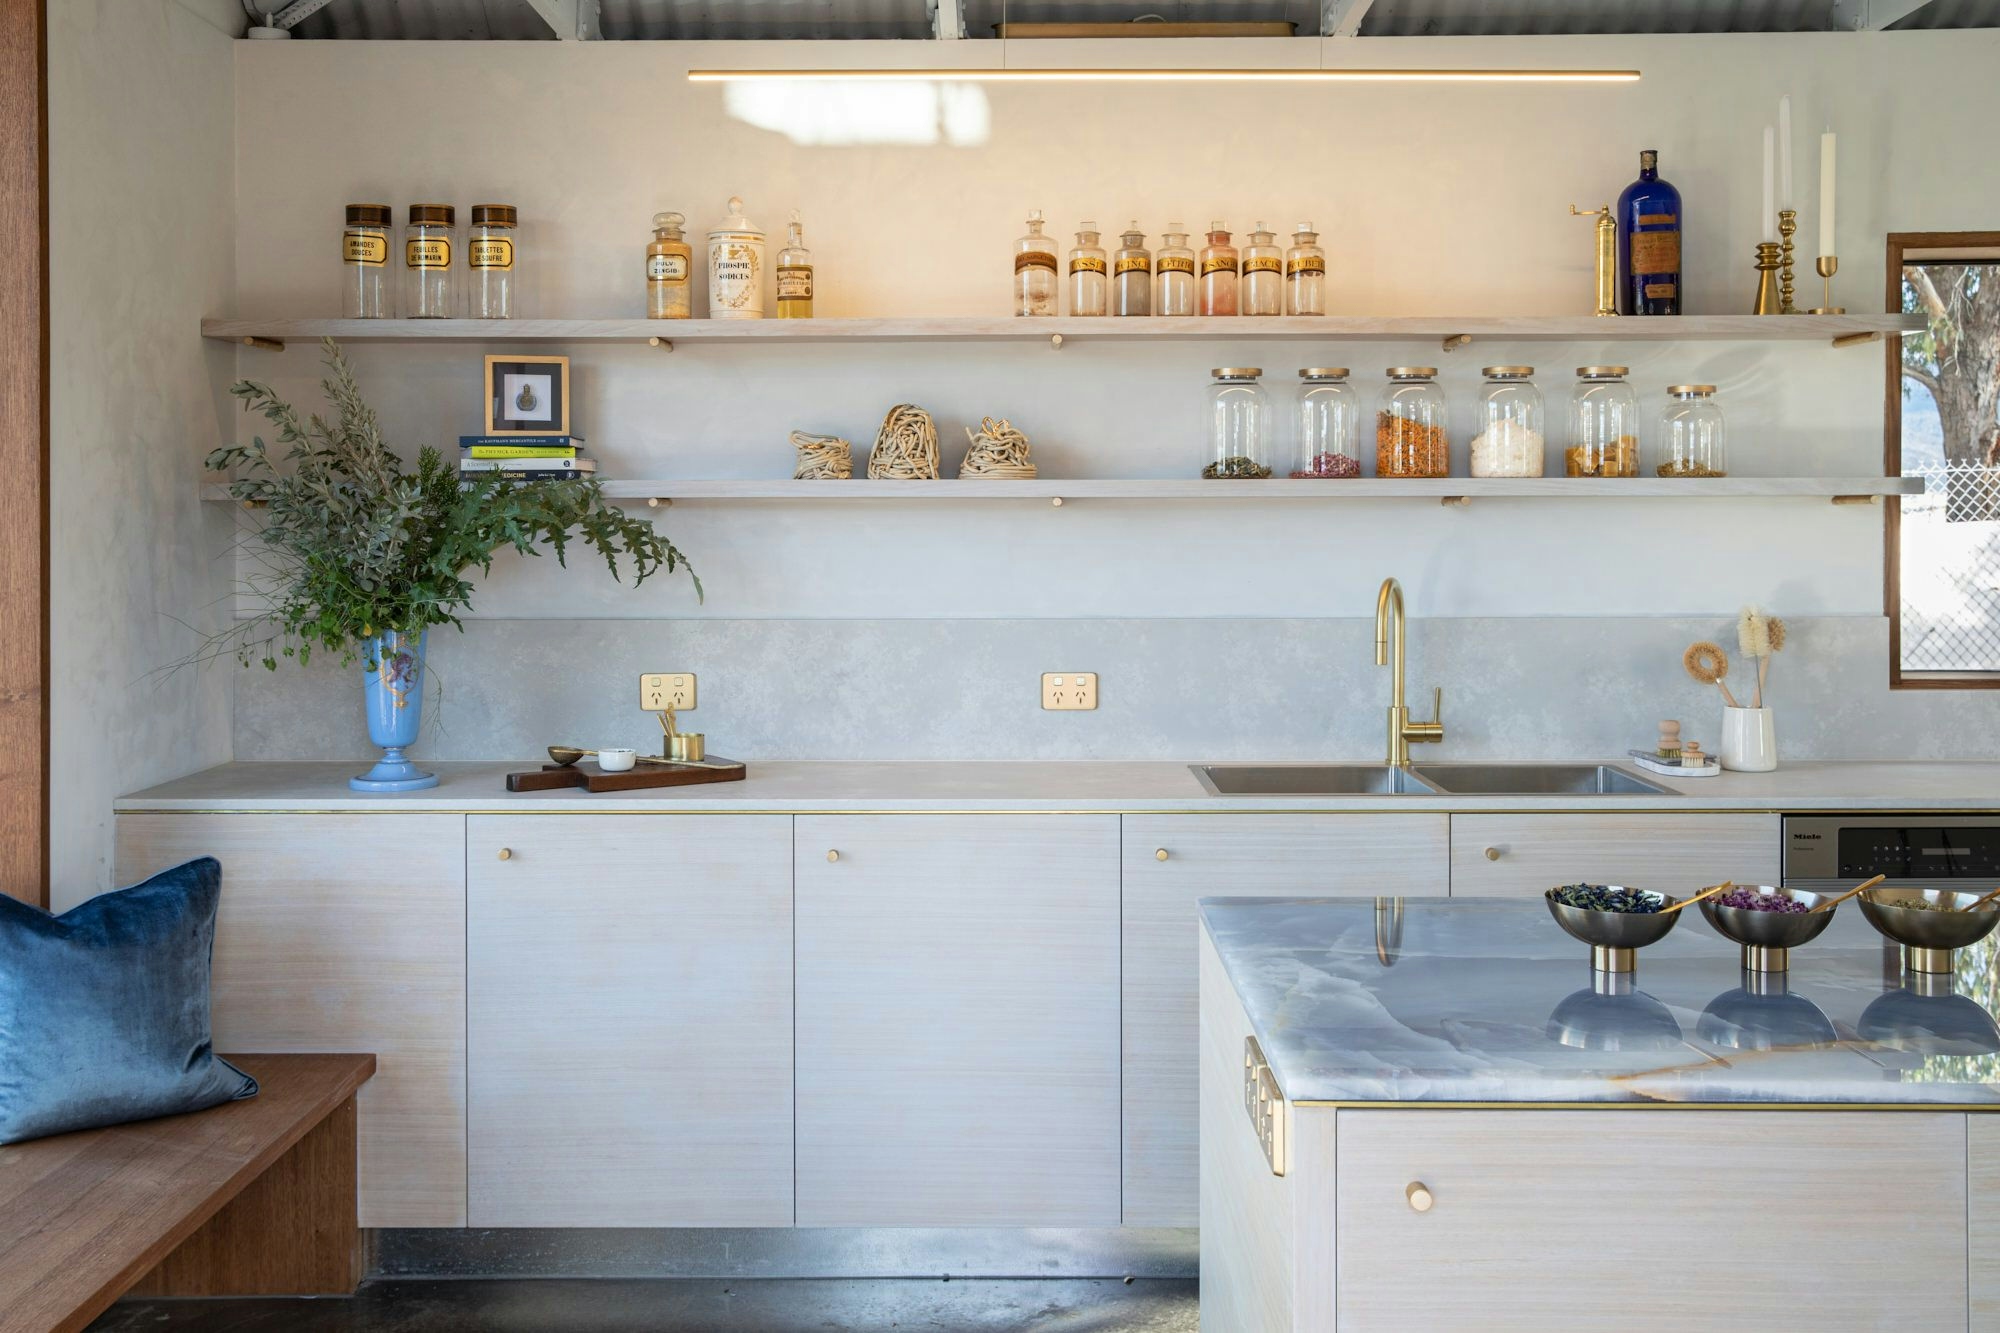 Beauty lab shelving with bottles and botanicals